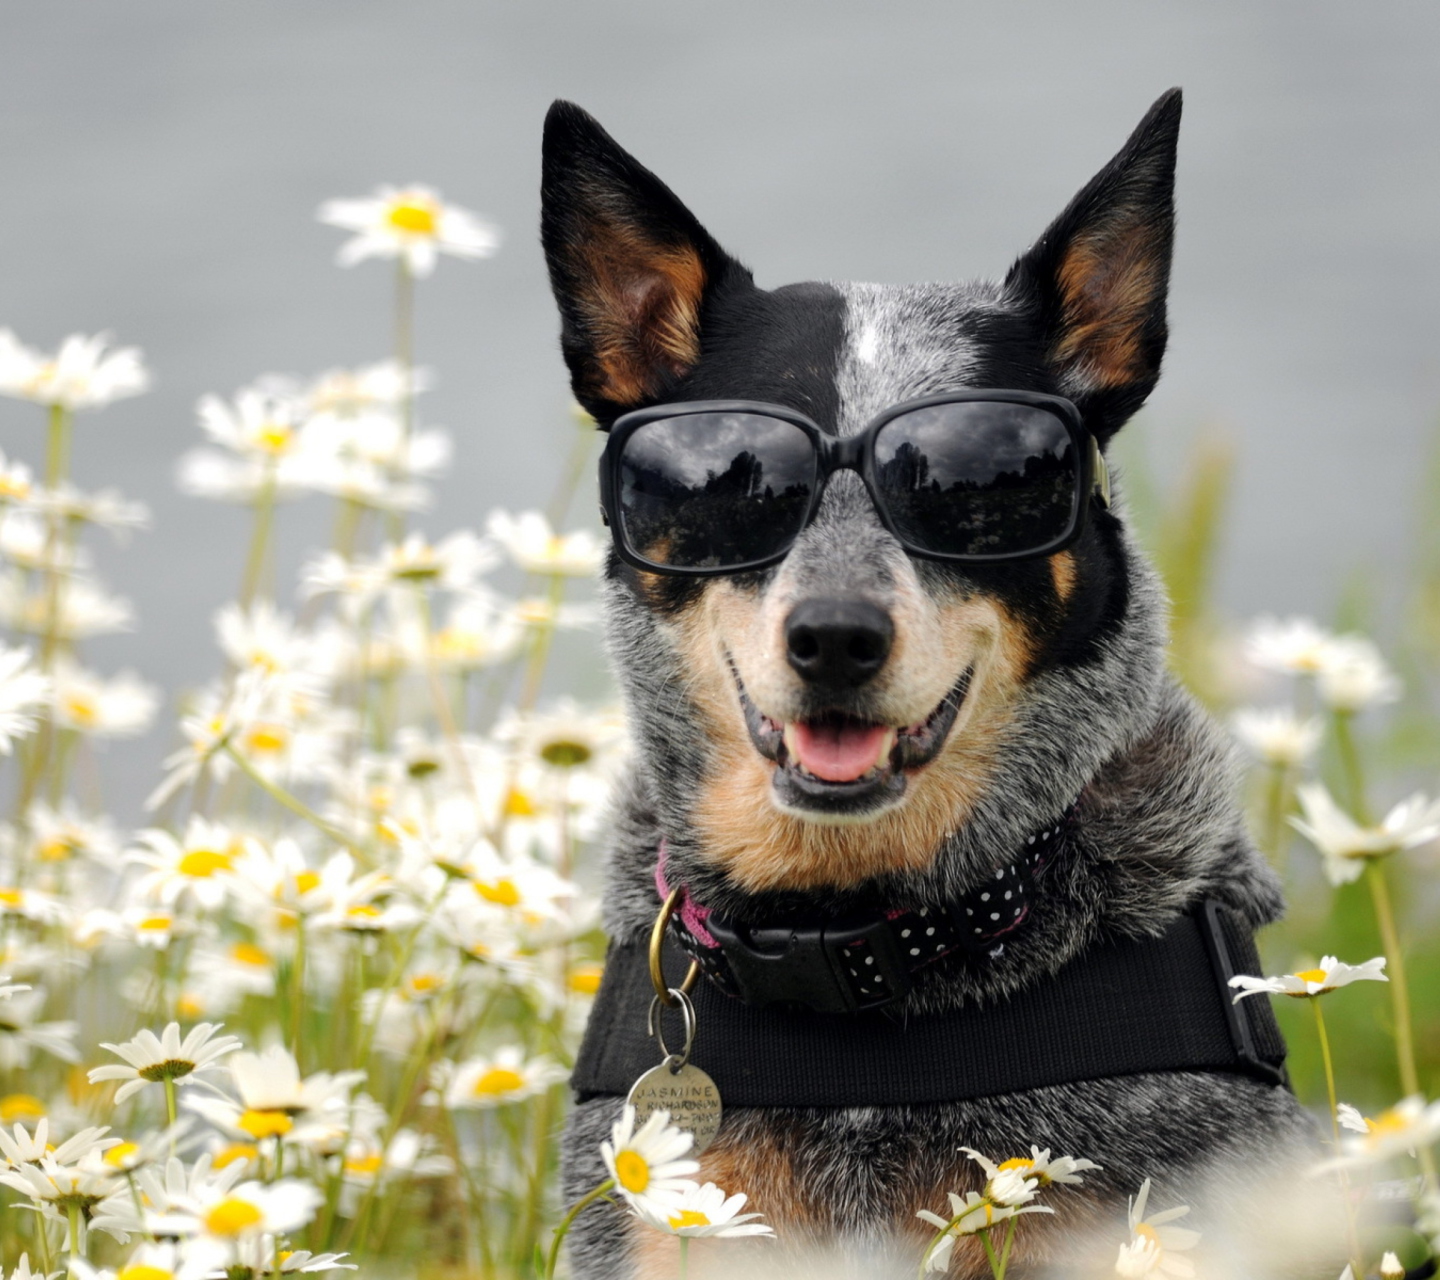 Dog, Sunglasses And Daisies wallpaper 1440x1280